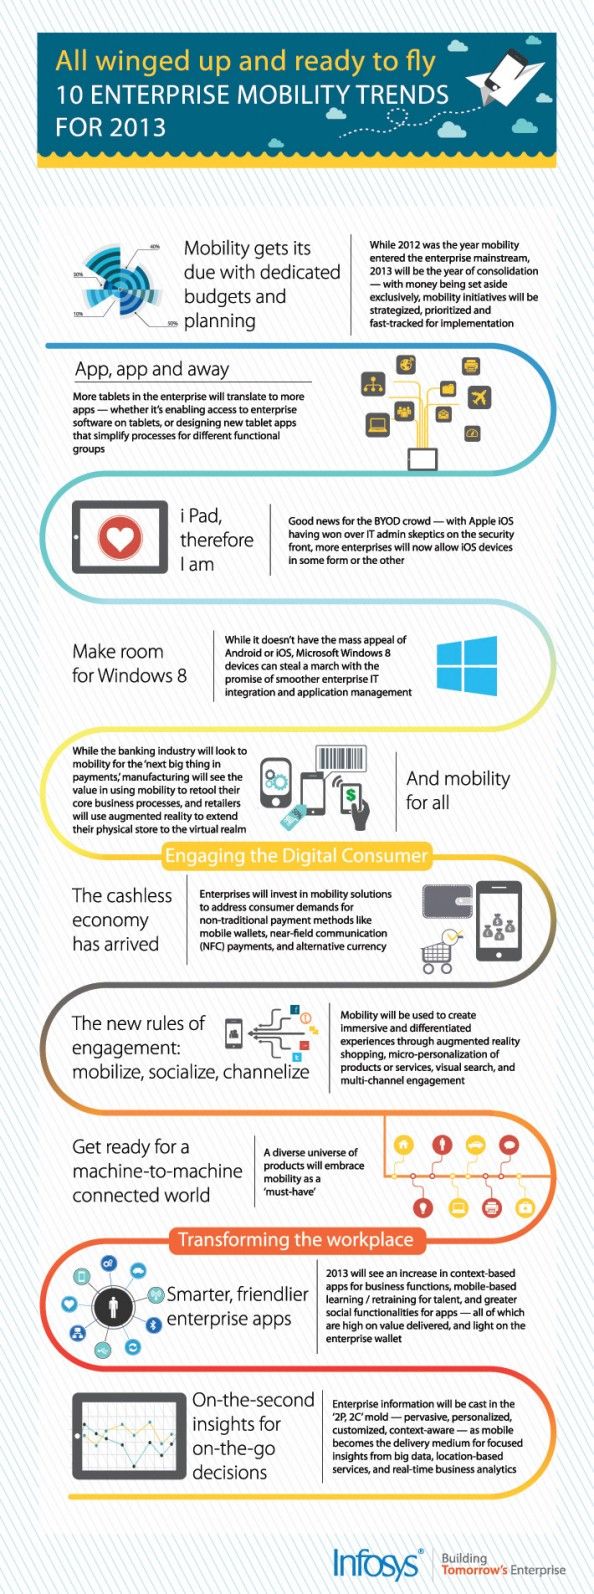 Psychology-Infographic-Enterprise-mobility-will-be-used-to-good-effect-in-diverse-business-and-technolo Psychology Infographic : Enterprise mobility will be used to good effect in diverse business and technolo...